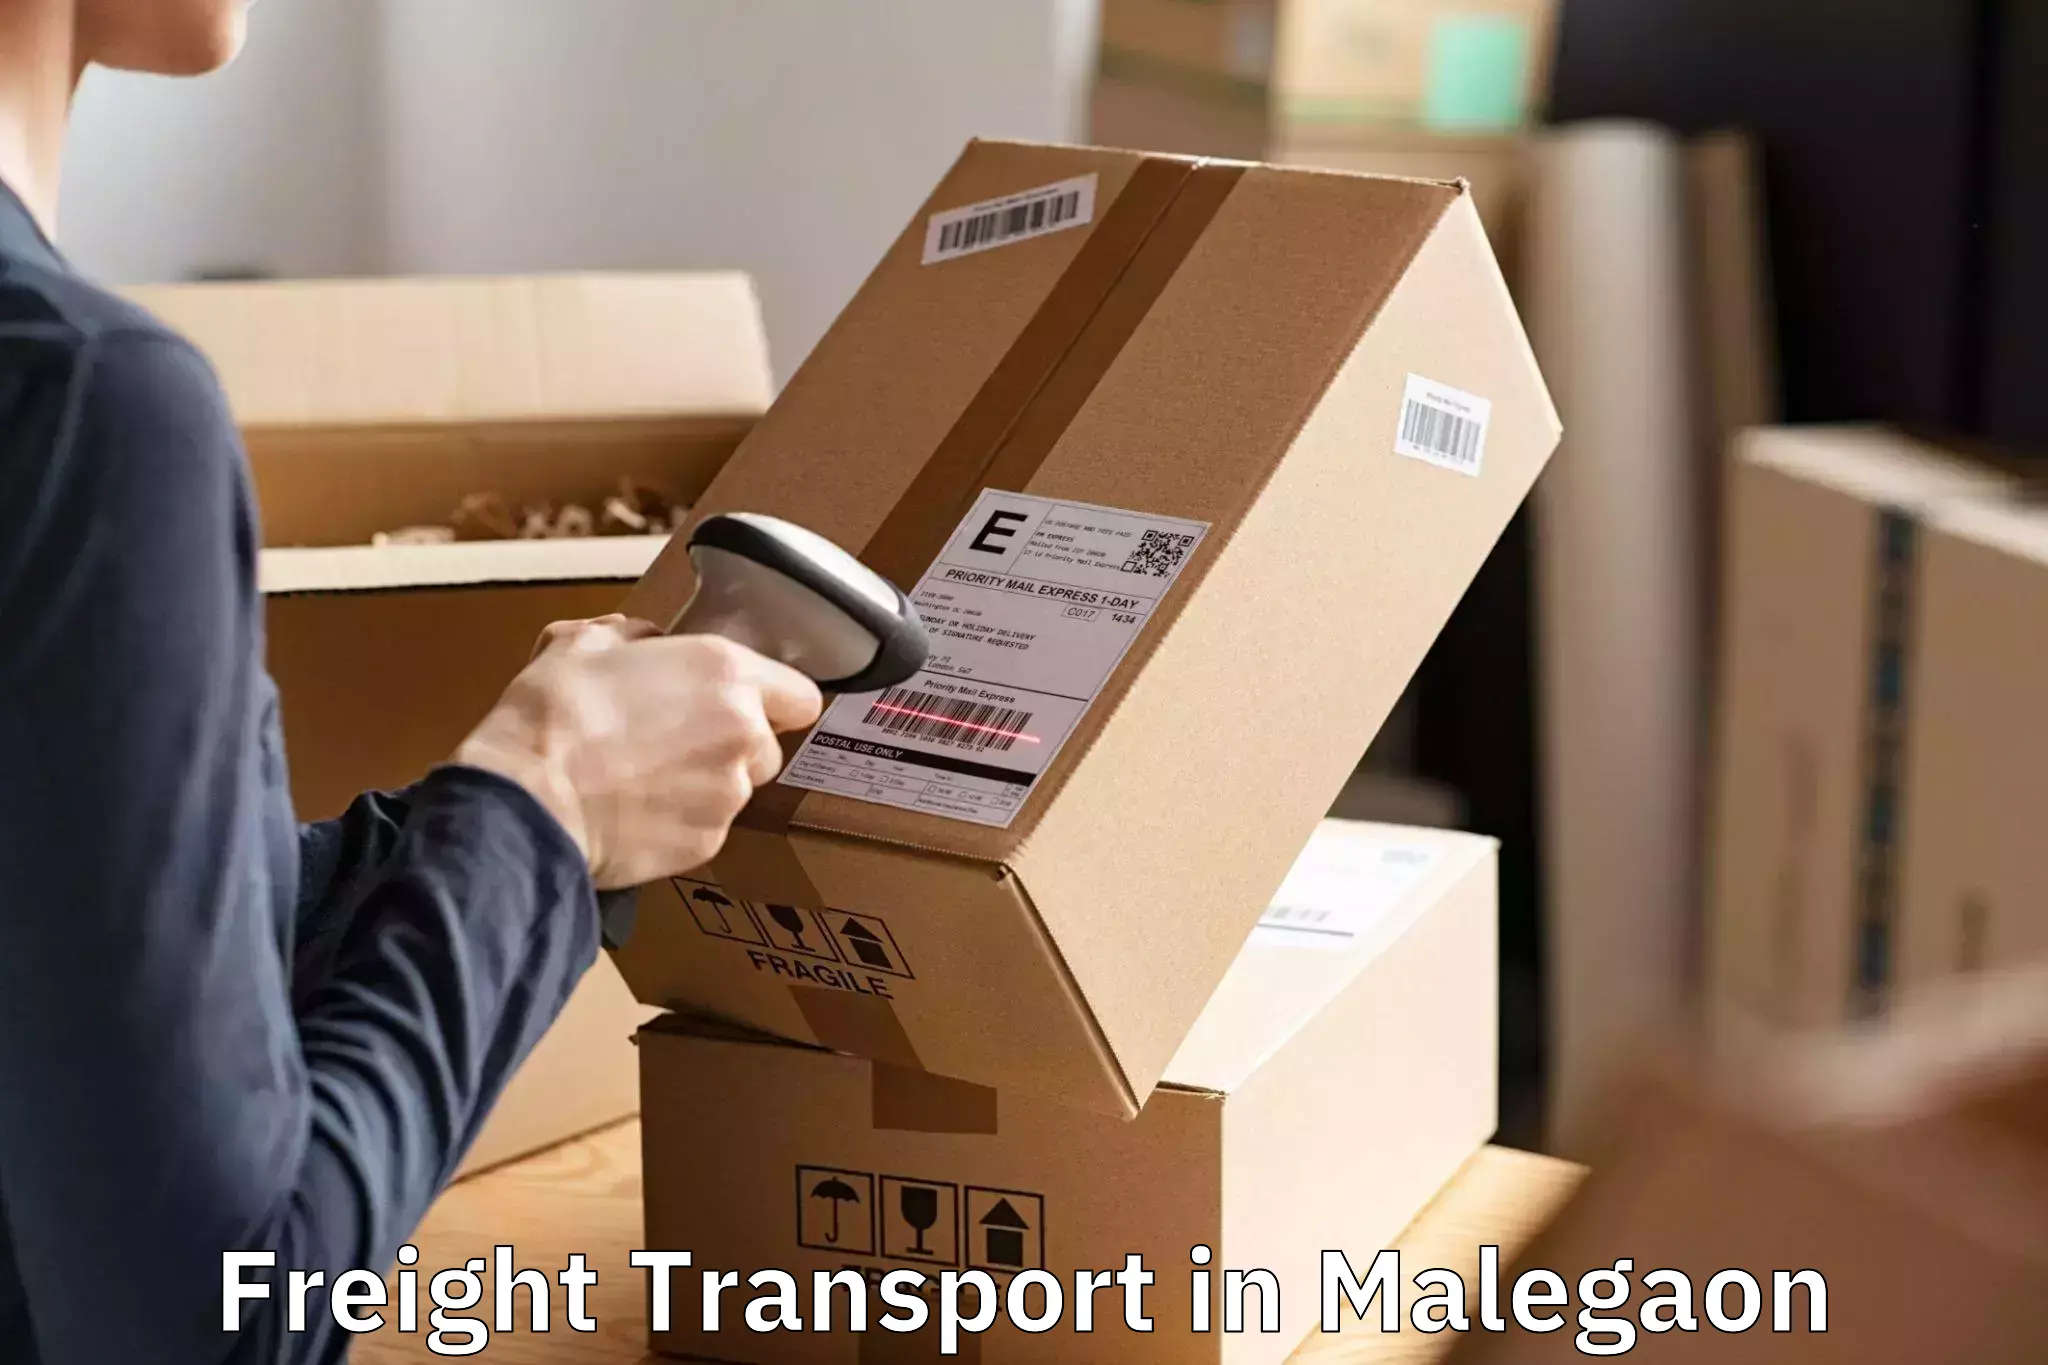 Easy Freight Transport Booking in Malegaon, Maharashtra (MH)